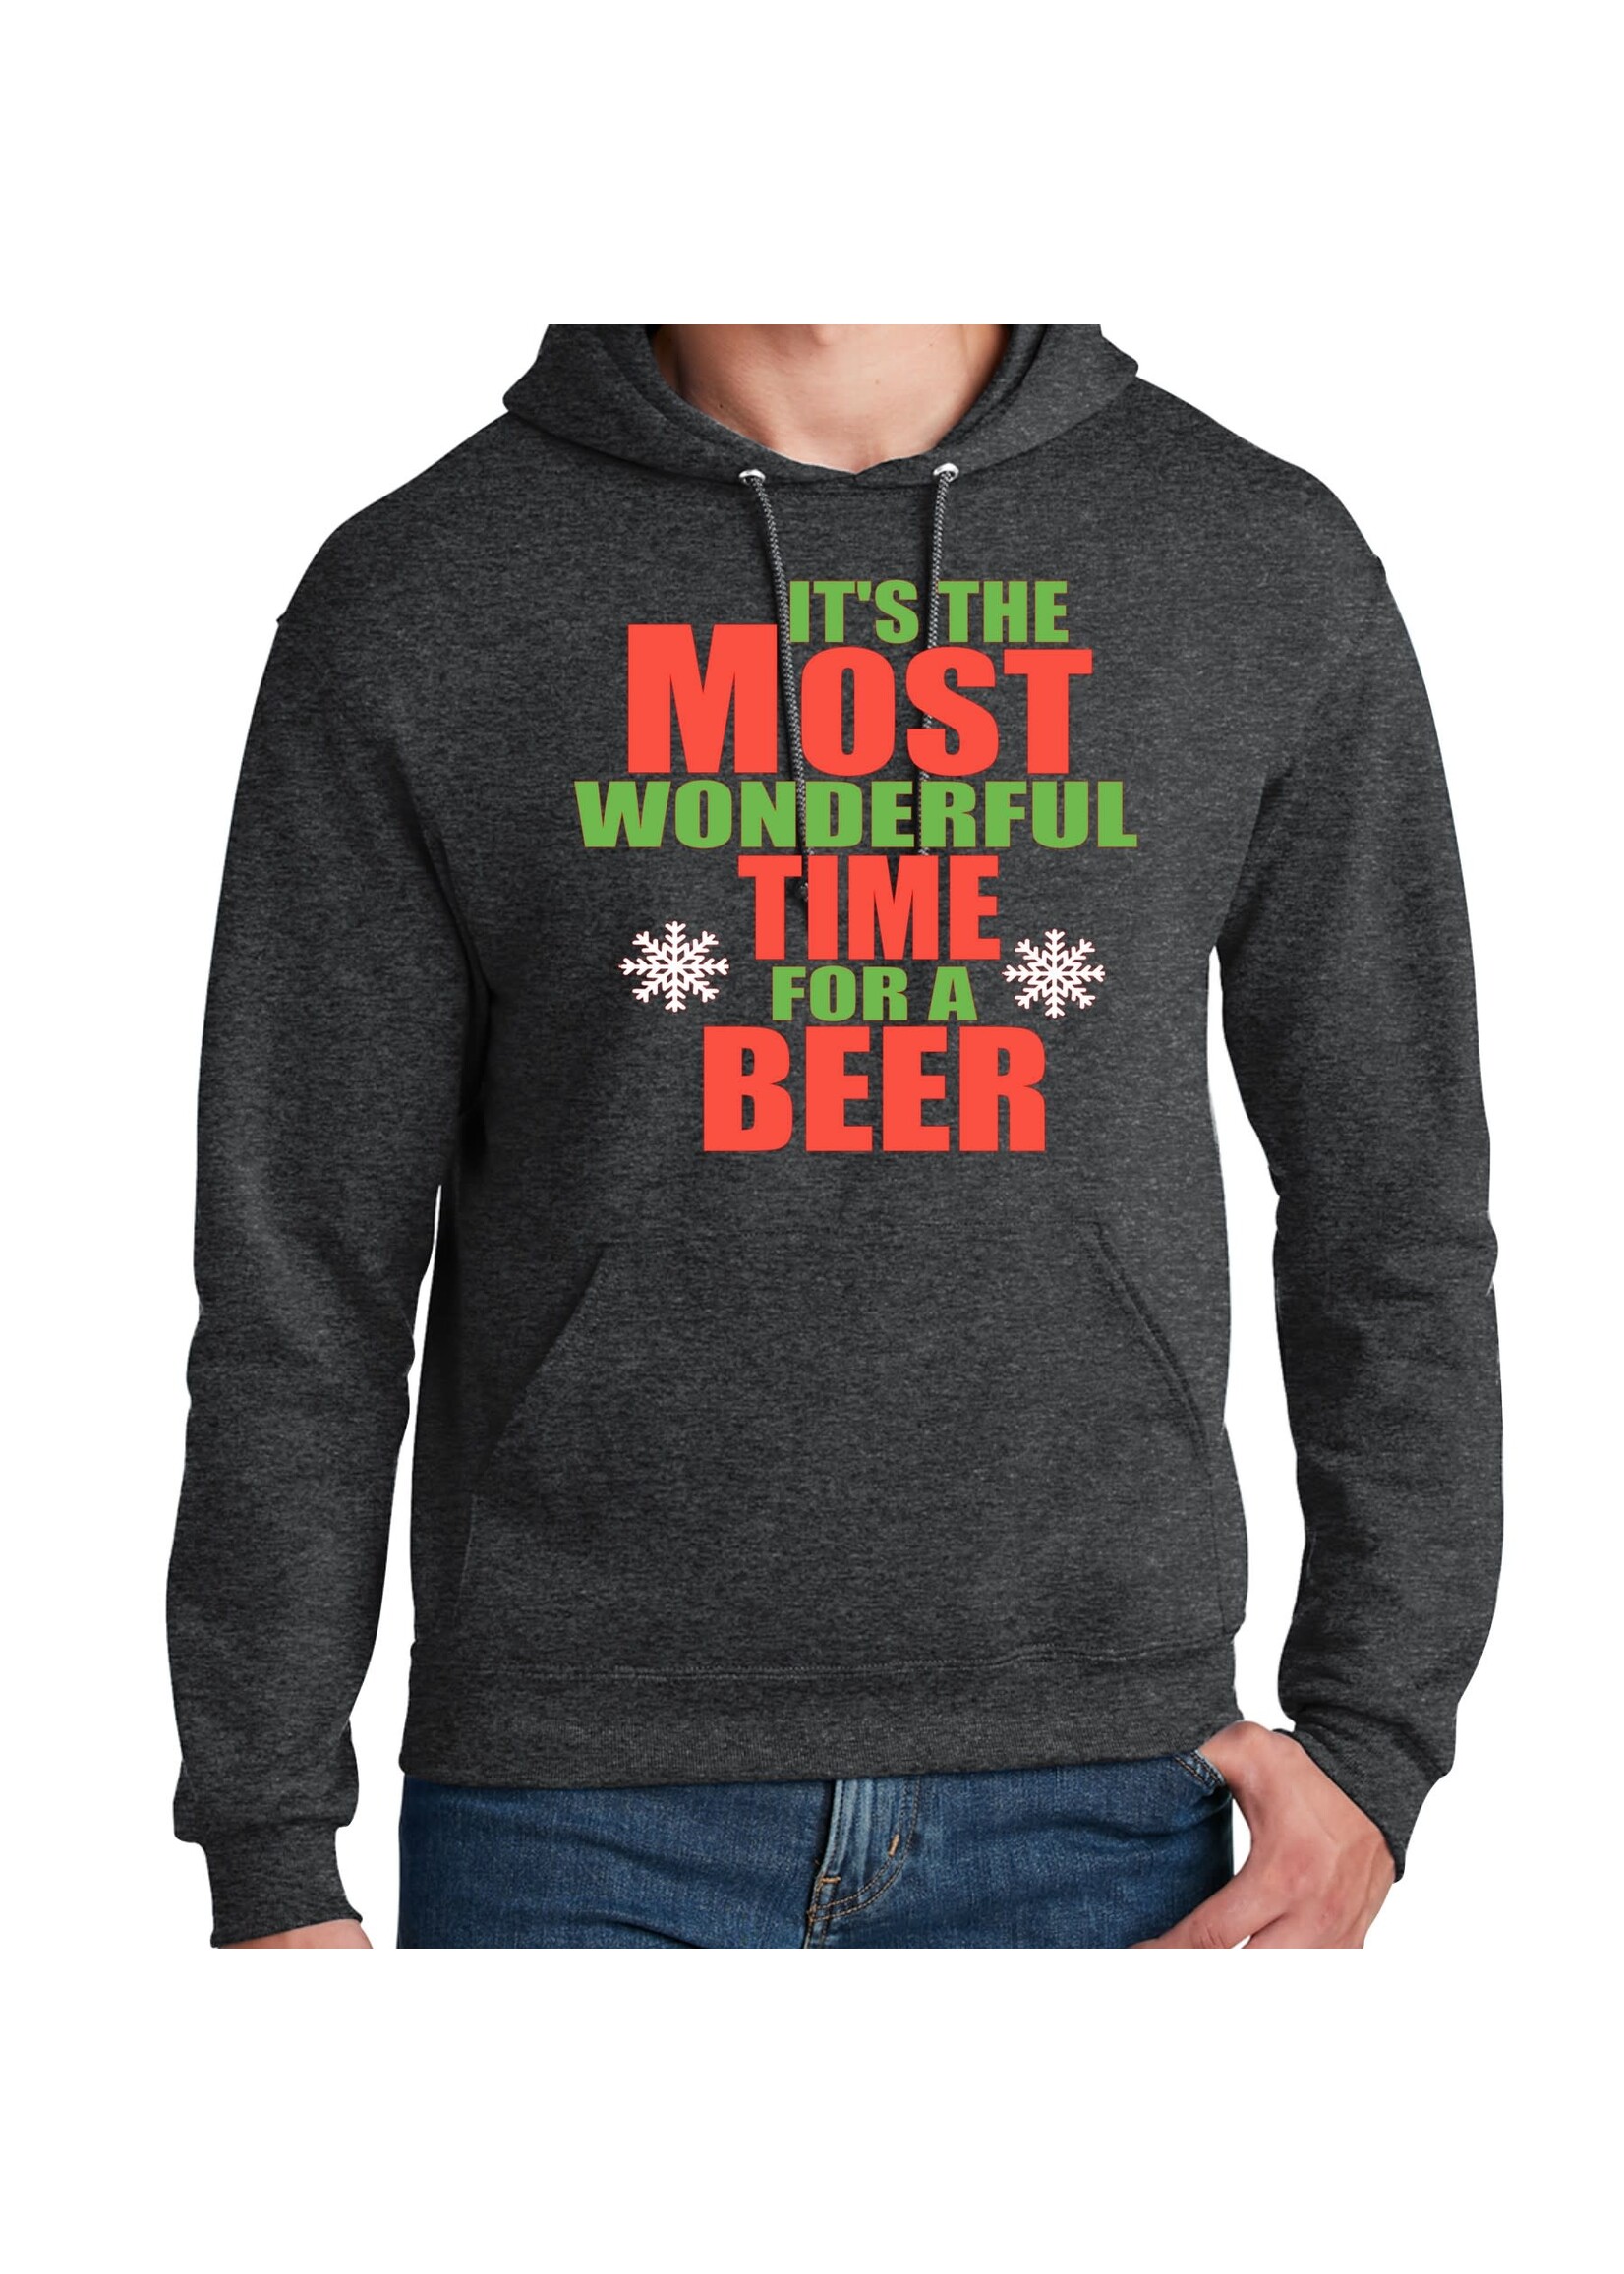 Most Wonderful Time for a Beer hoodie